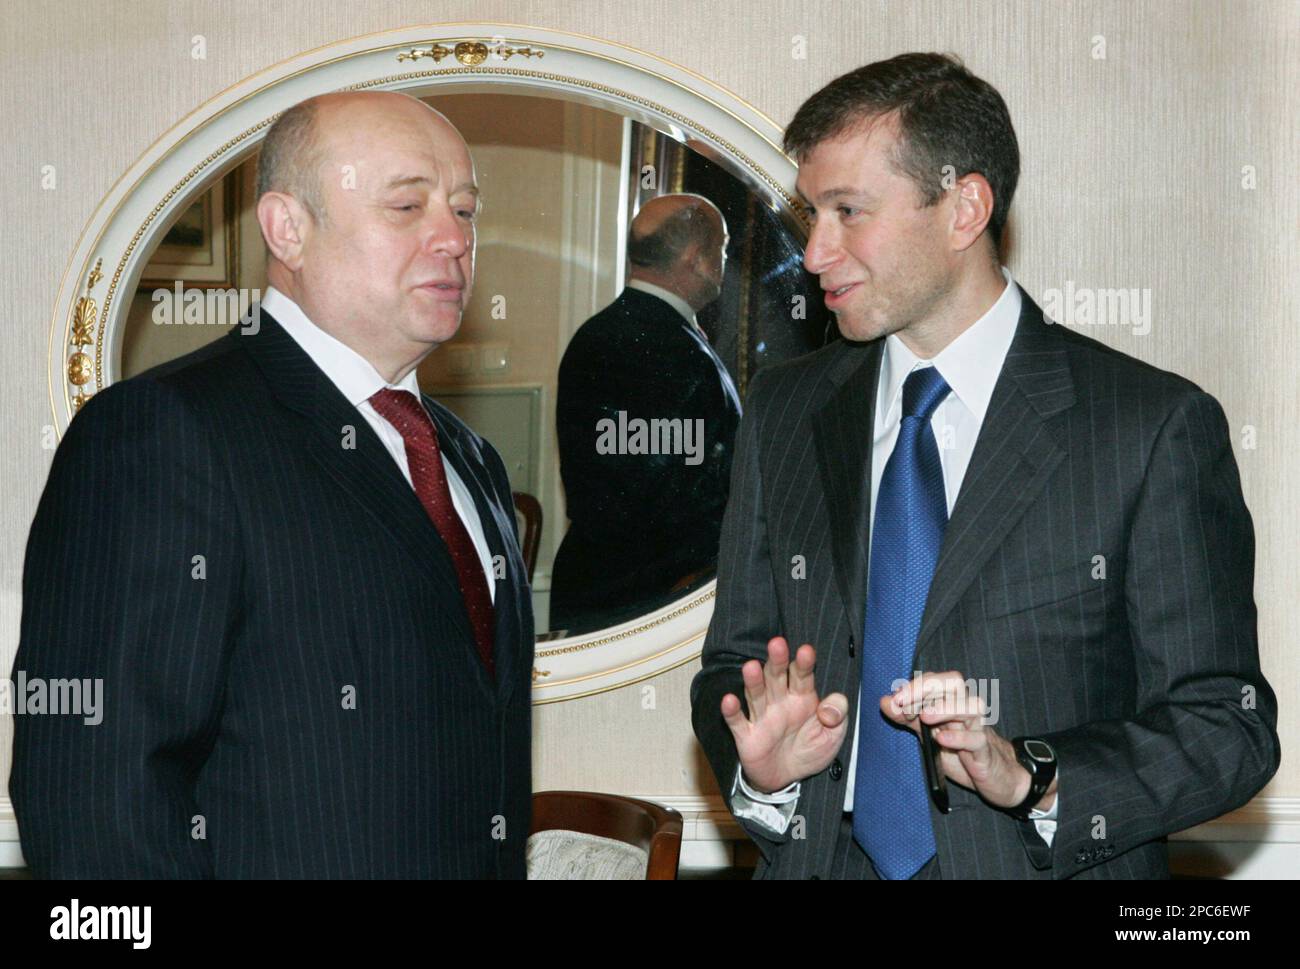 Russian Prime Minister Mikhail Fradkov, left, speaks with billionaire Roman Abramovich before a session of Russia's Security Council in the Moscow Kremlin, Wednesday, Dec. 20, 2006. Abramovich on Wednesday submitted his resignation as governor of the remote Far Eastern Chukotka region, an aide said. Abramovich was first elected governor of Chukotka six years ago and was appointed by Putin last year after direct elections of regional leaders were abolished.(AP Photo/ITAR-TASS/Presidential Press Service, Vladimir Rodinov) Foto Stock